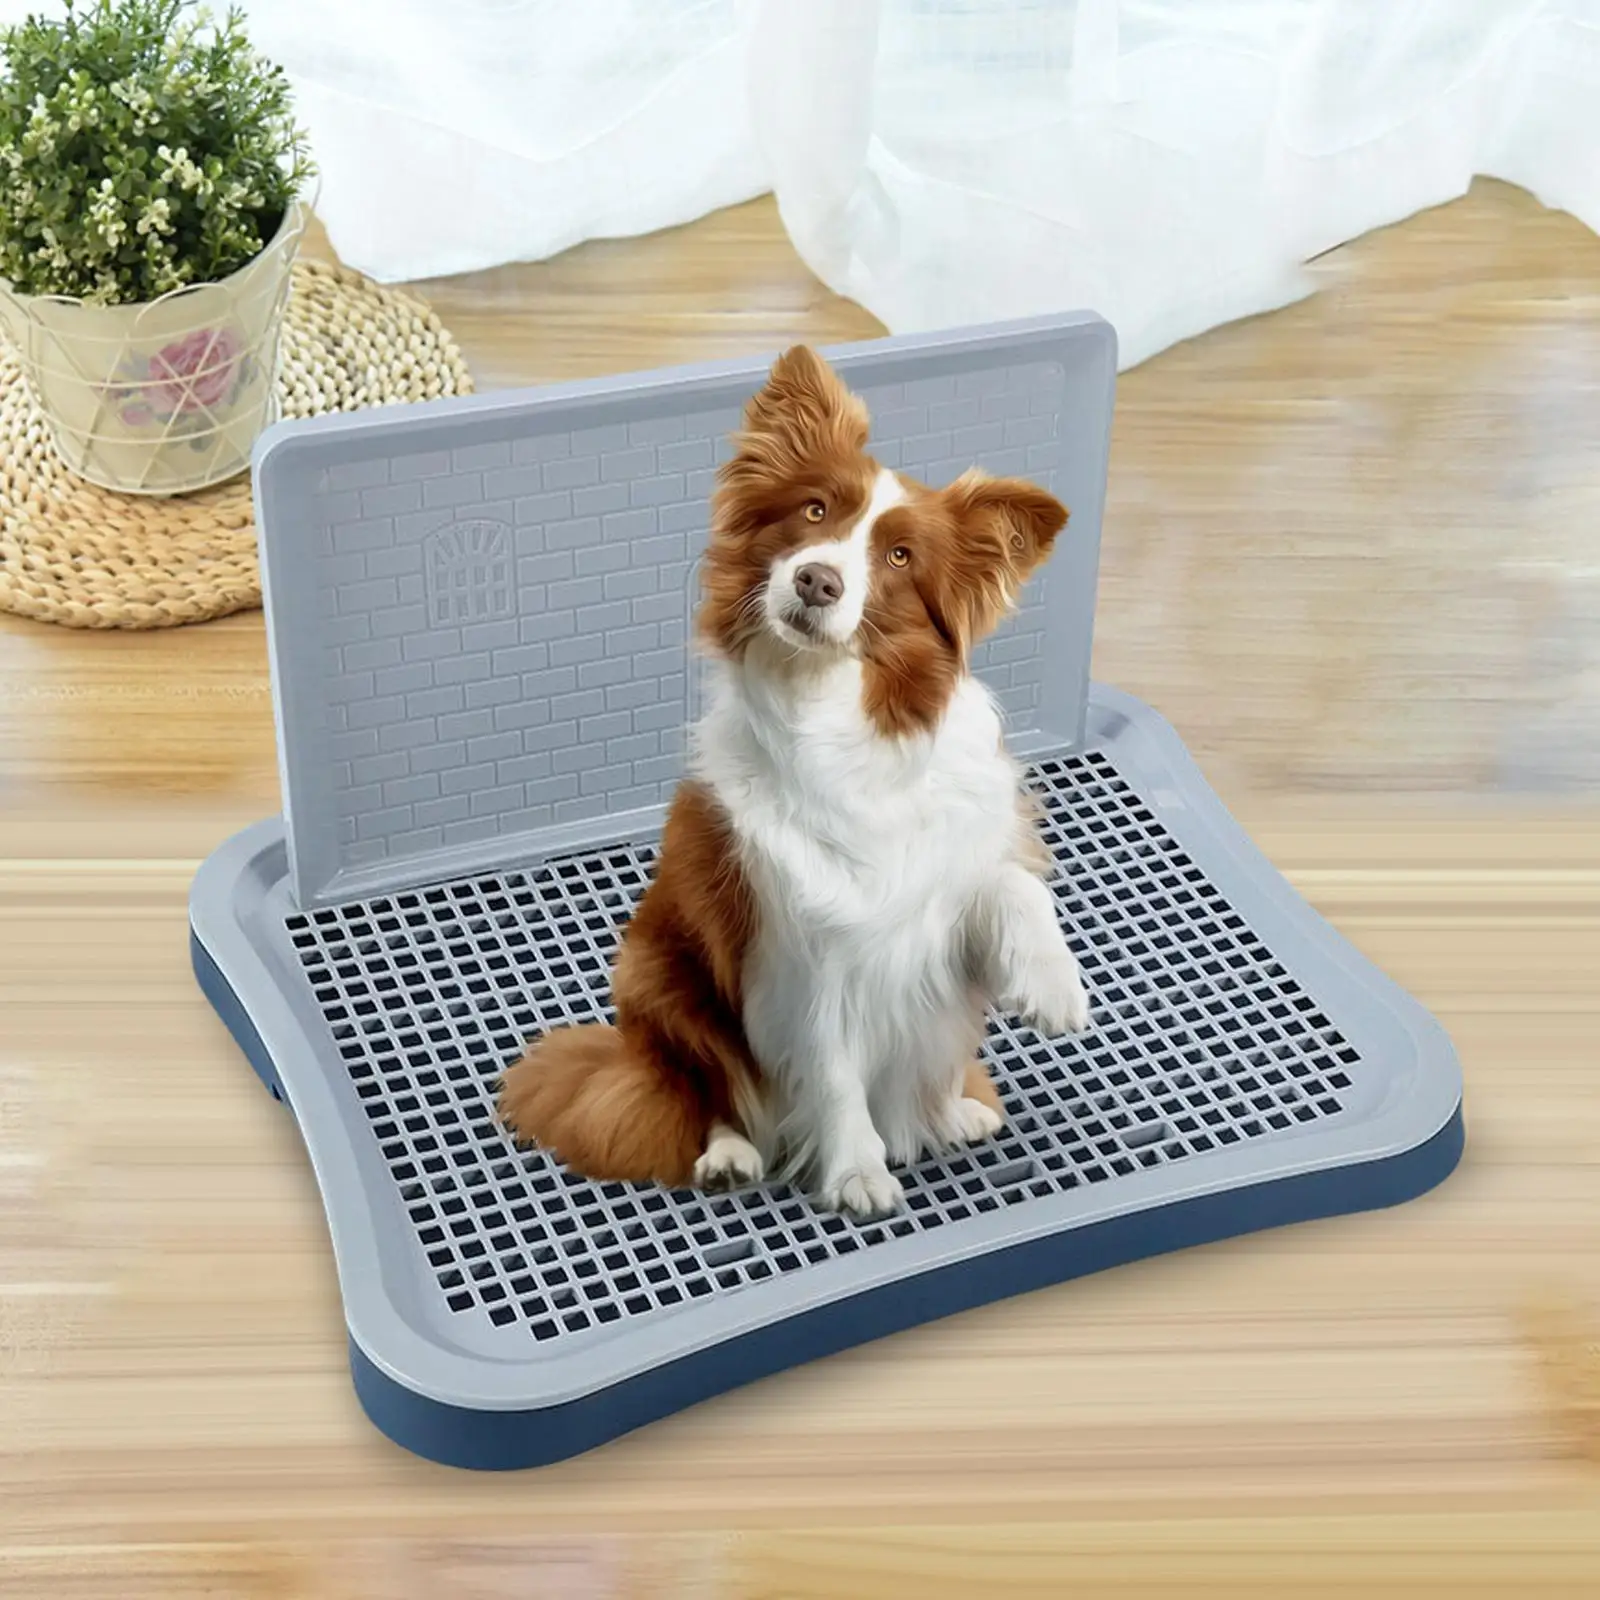 Dog Toilet Mesh Grids Keep Paws and Floors Clean Puppy Pee Pad Pet Training Toilet Tray for Small and Medium Dogs Puppy Hamster